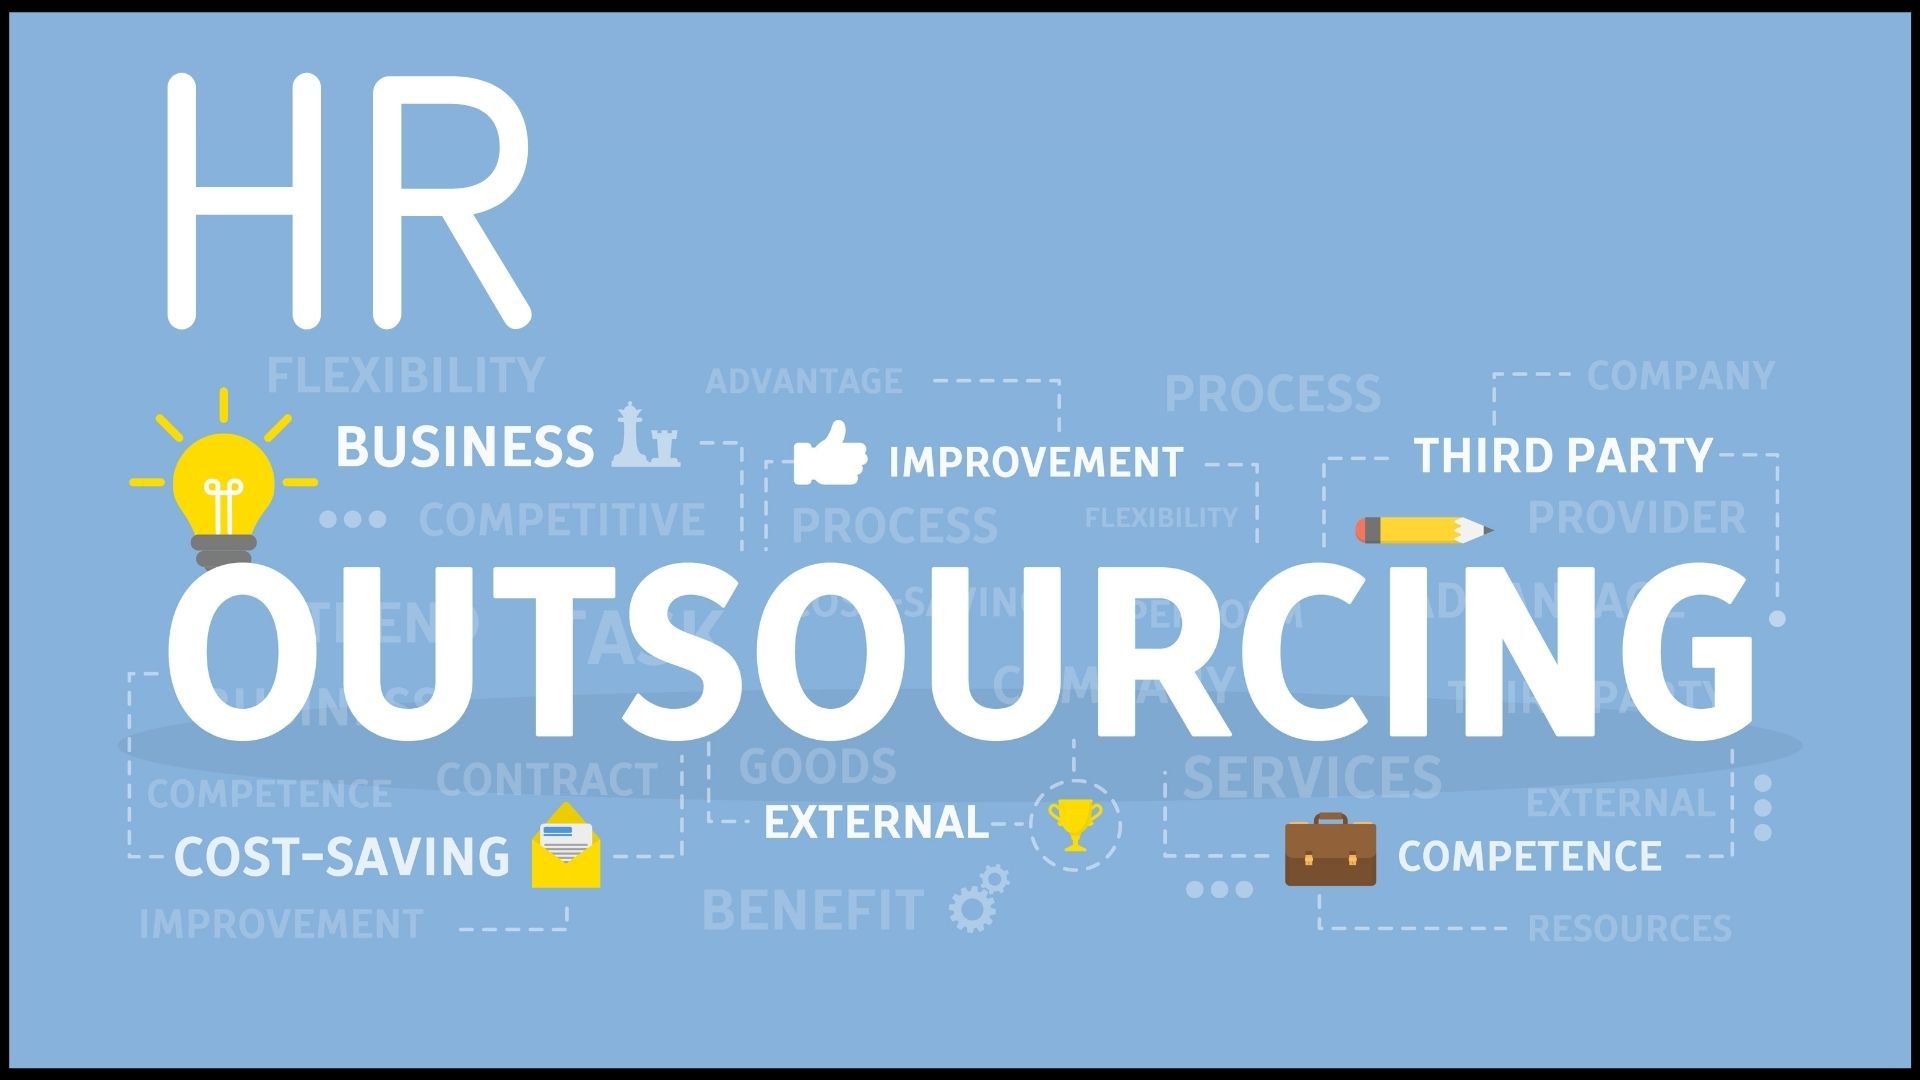 Hr Outsourcing Overview Services And Benefits Marketing